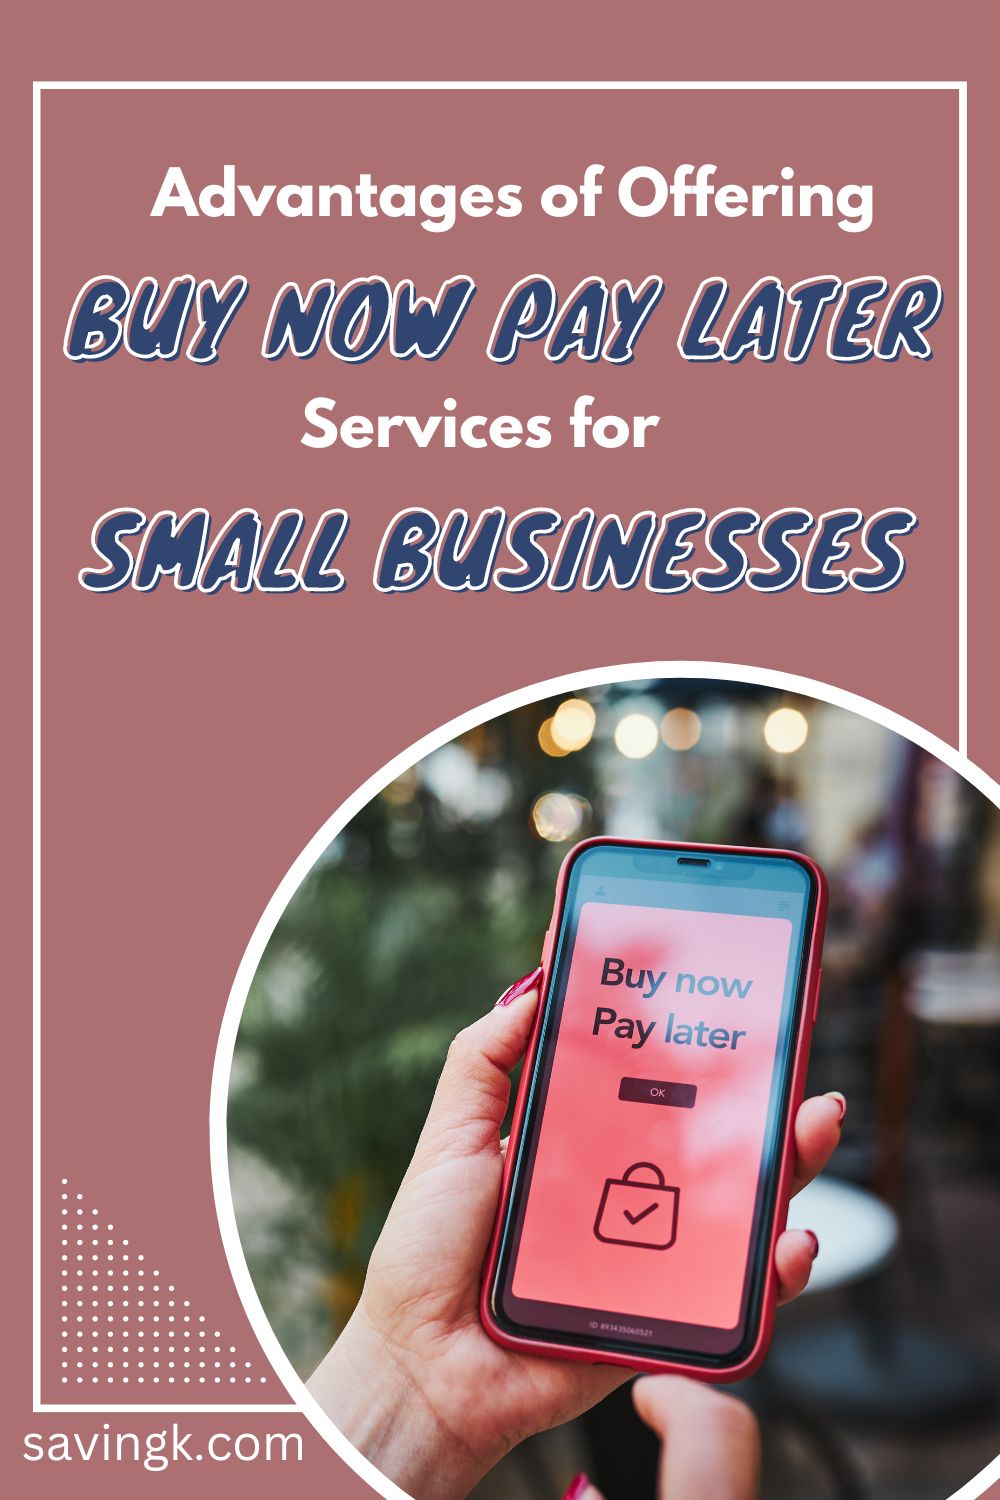 The Advantages of Offering Buy Now Pay Later Services for Small Businesses